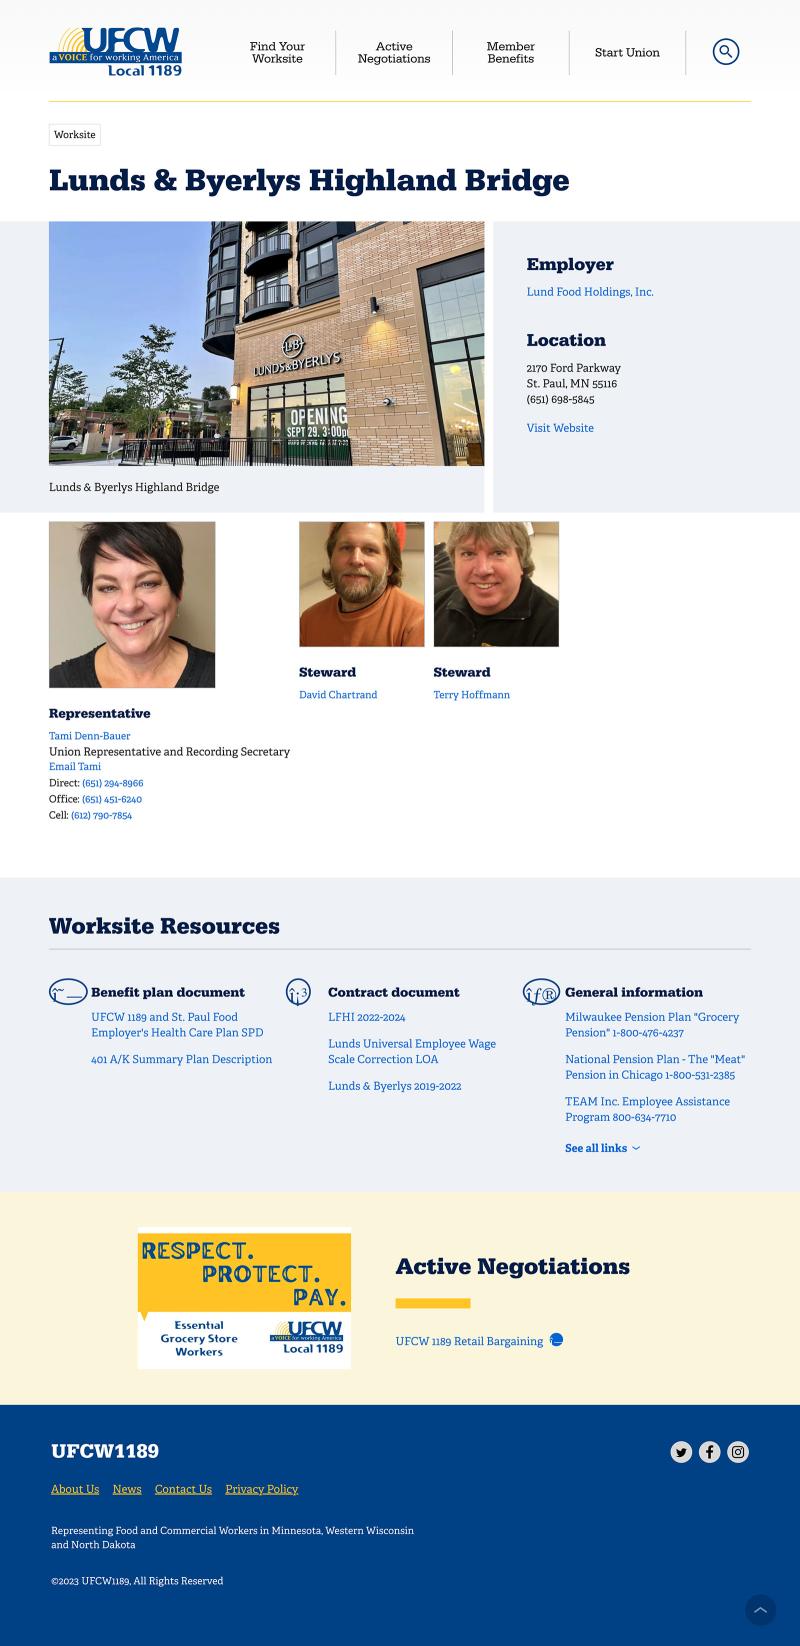 Individual worksite page